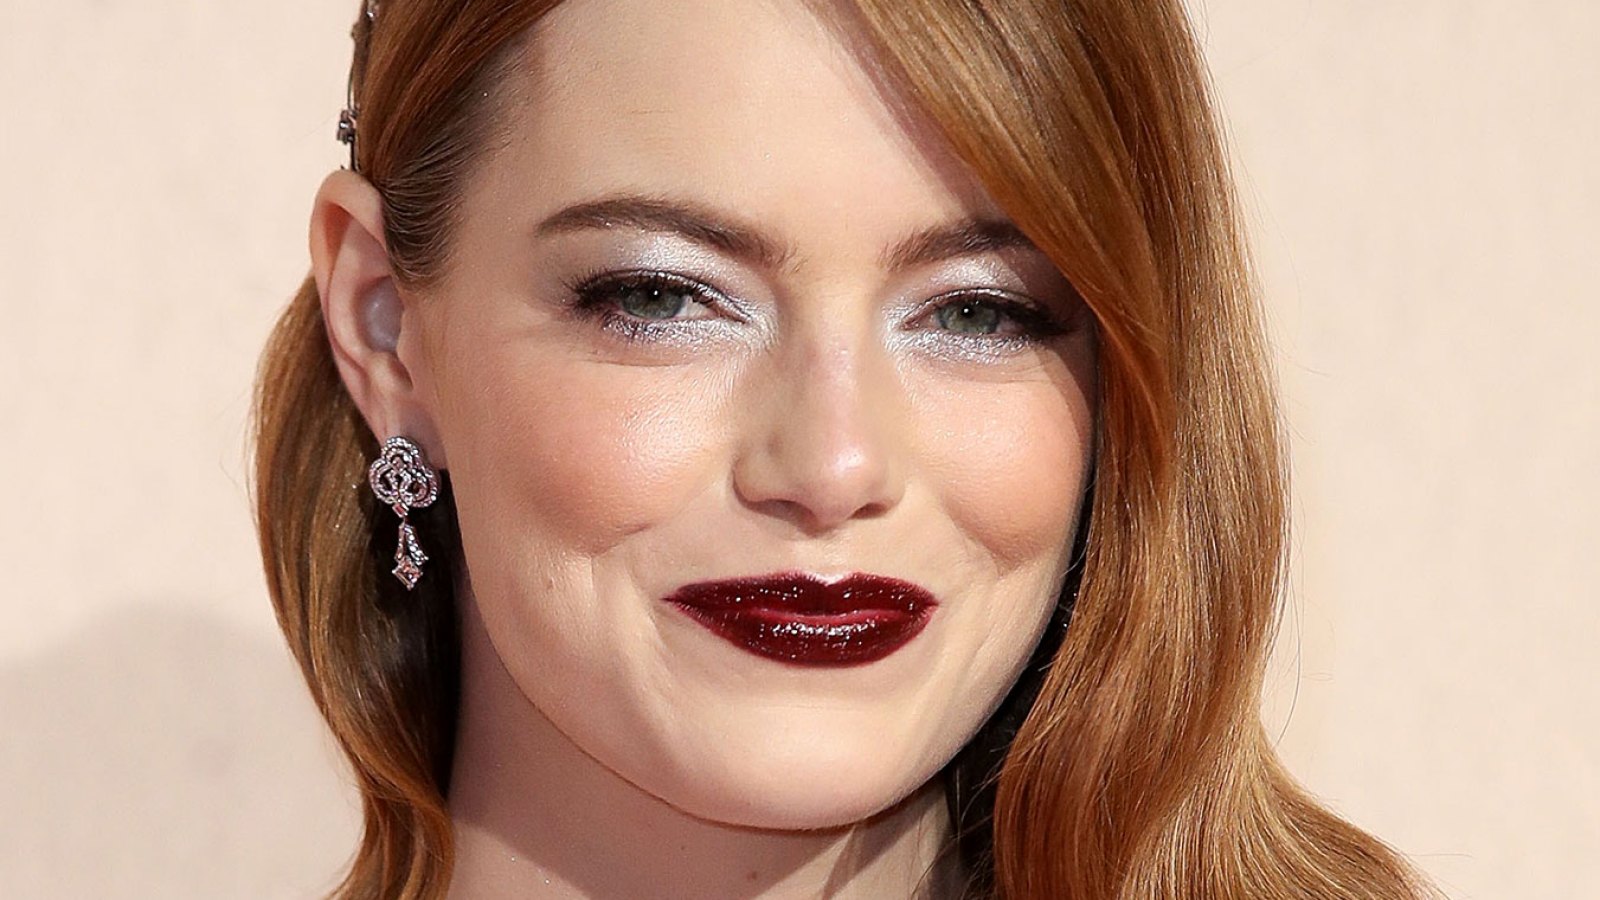 Louis Vuitton unveils new fragrance fronted by Emma Stone